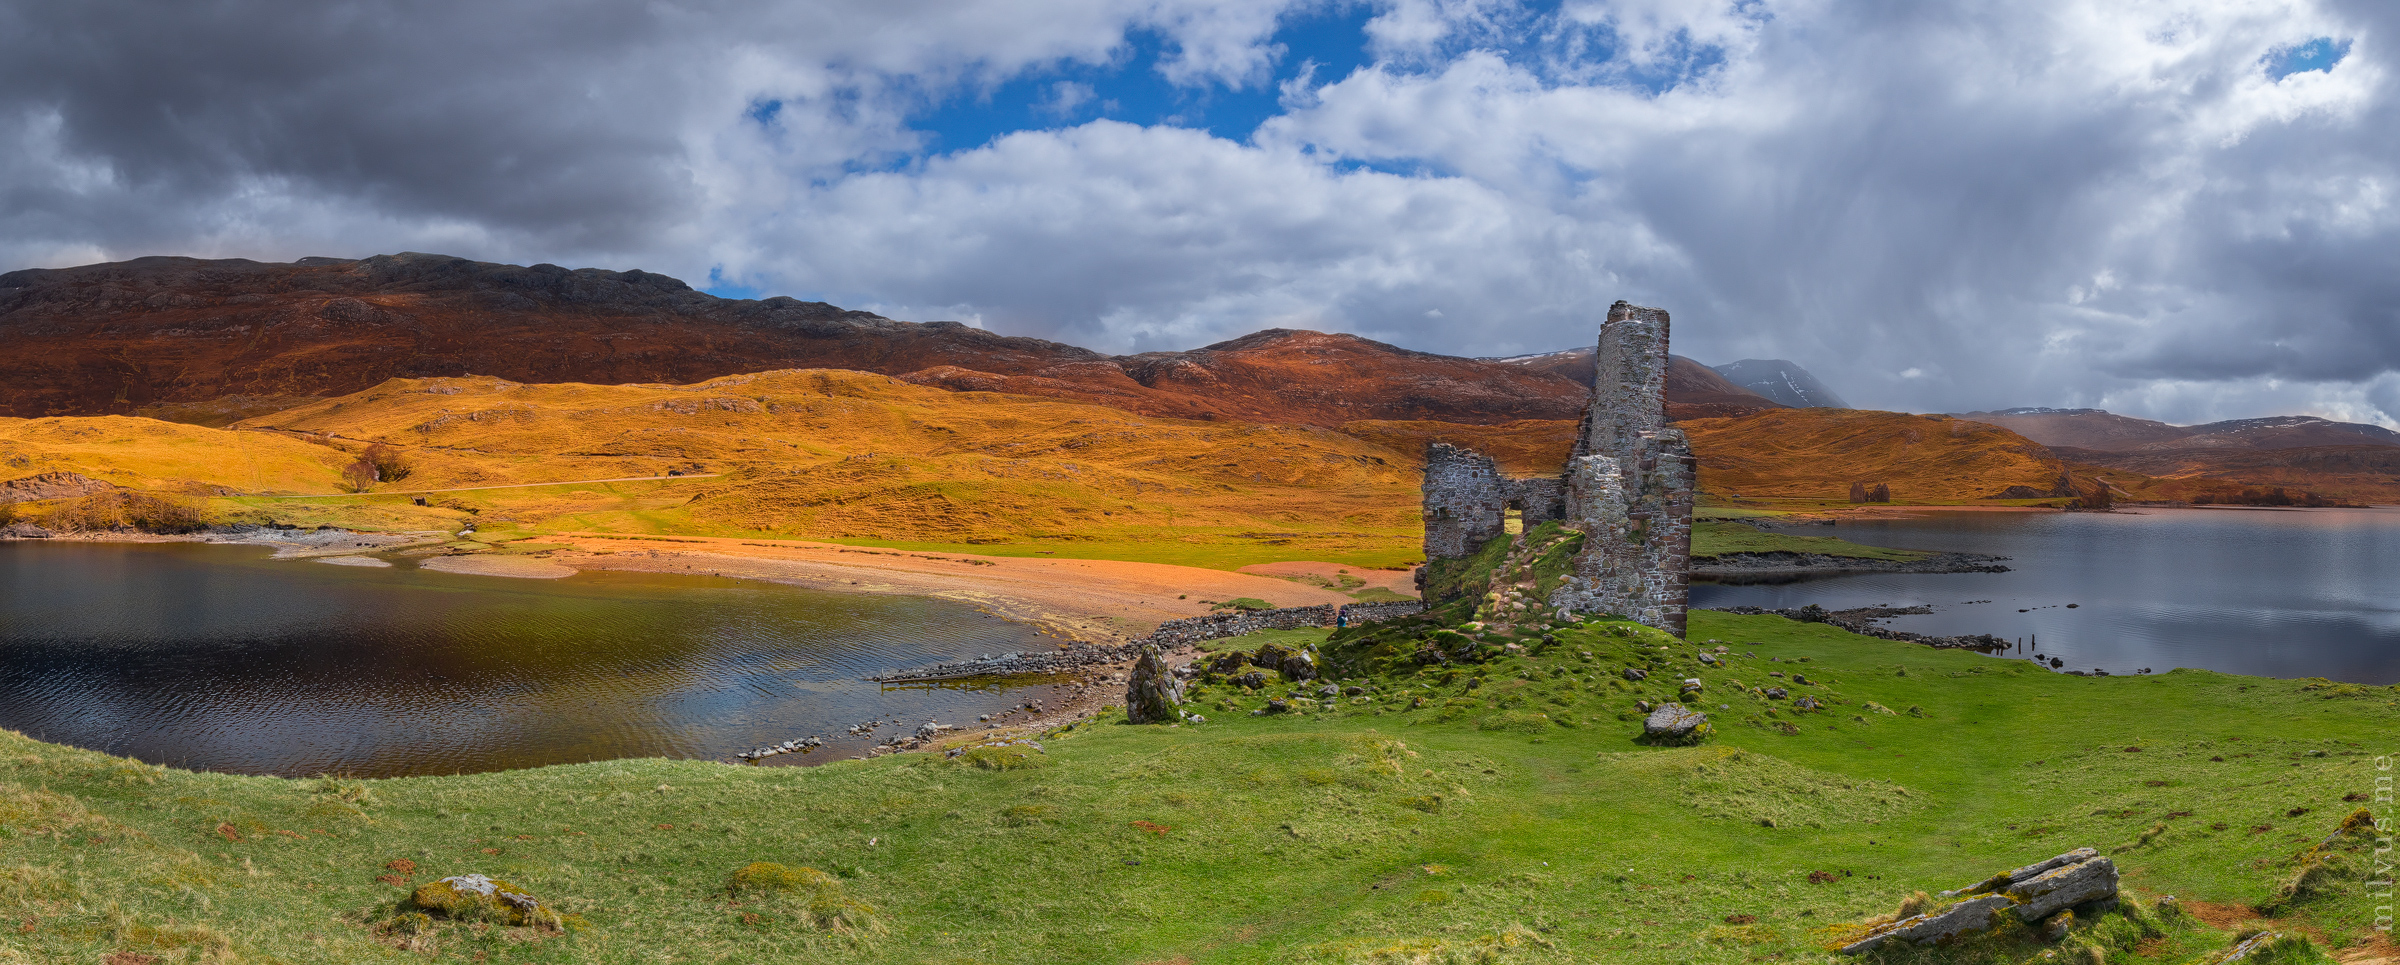 The scenery of Ardvreck Castle